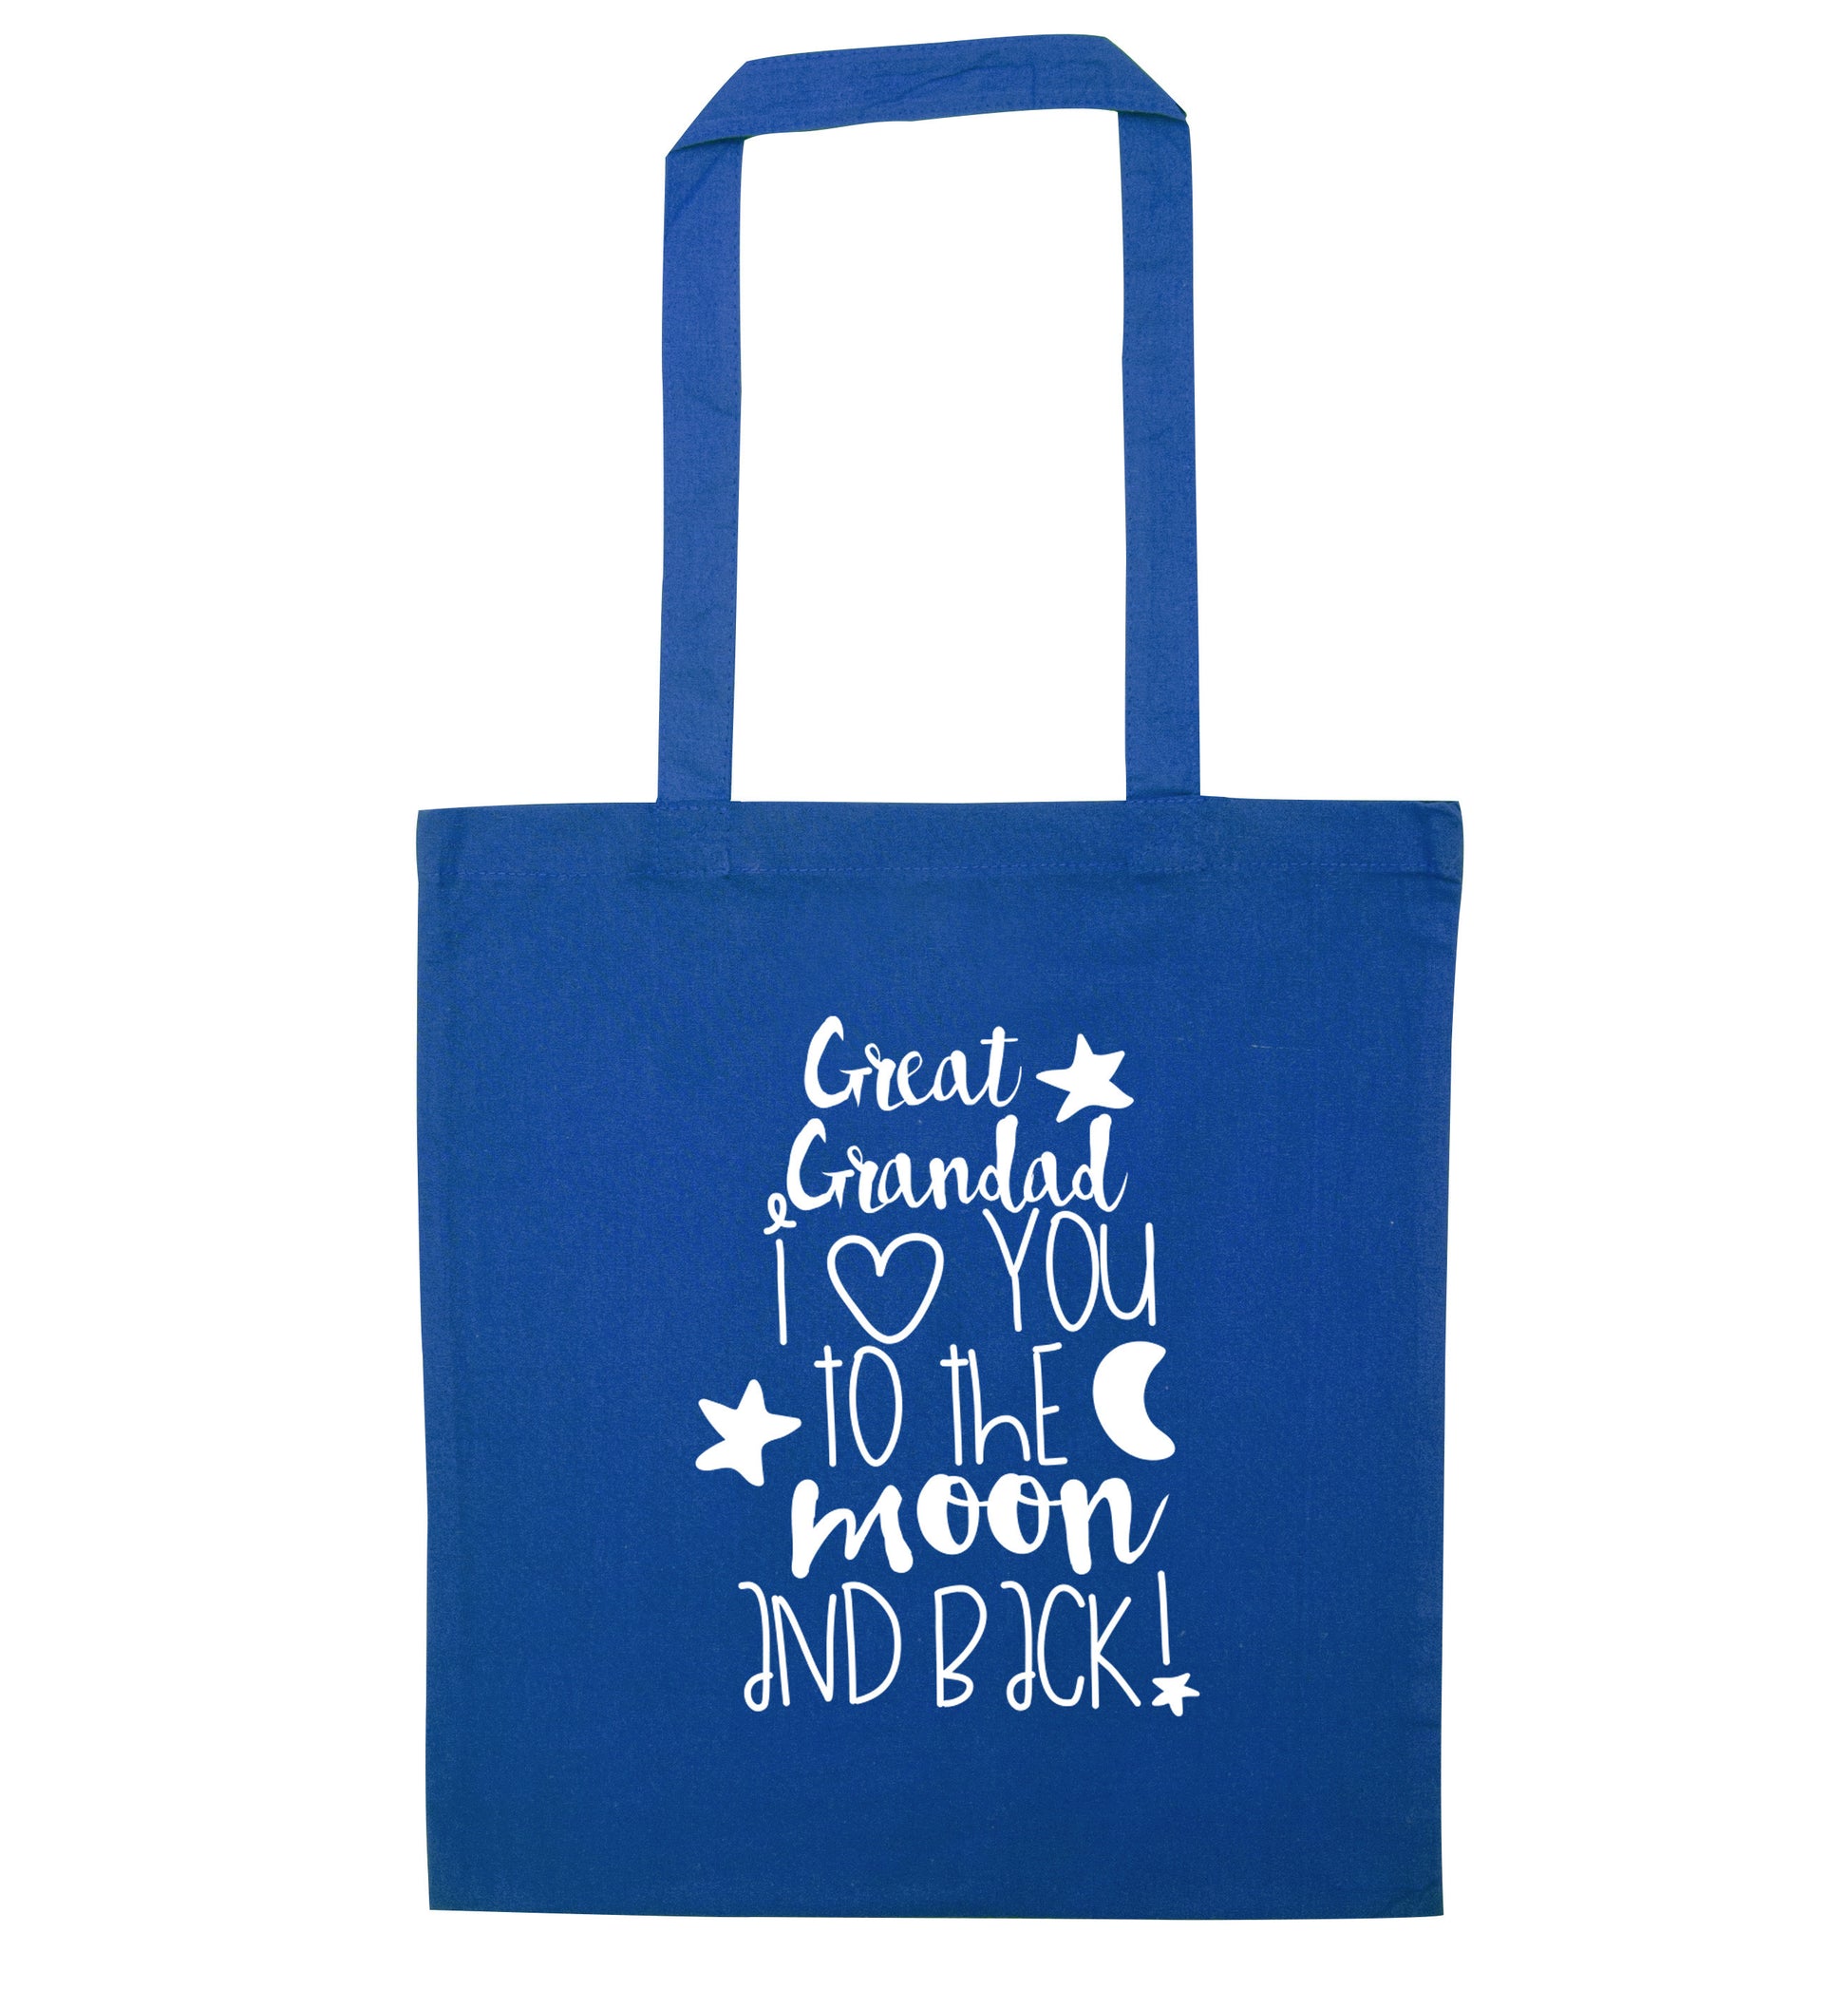 Great Grandad I love you to the moon and back blue tote bag